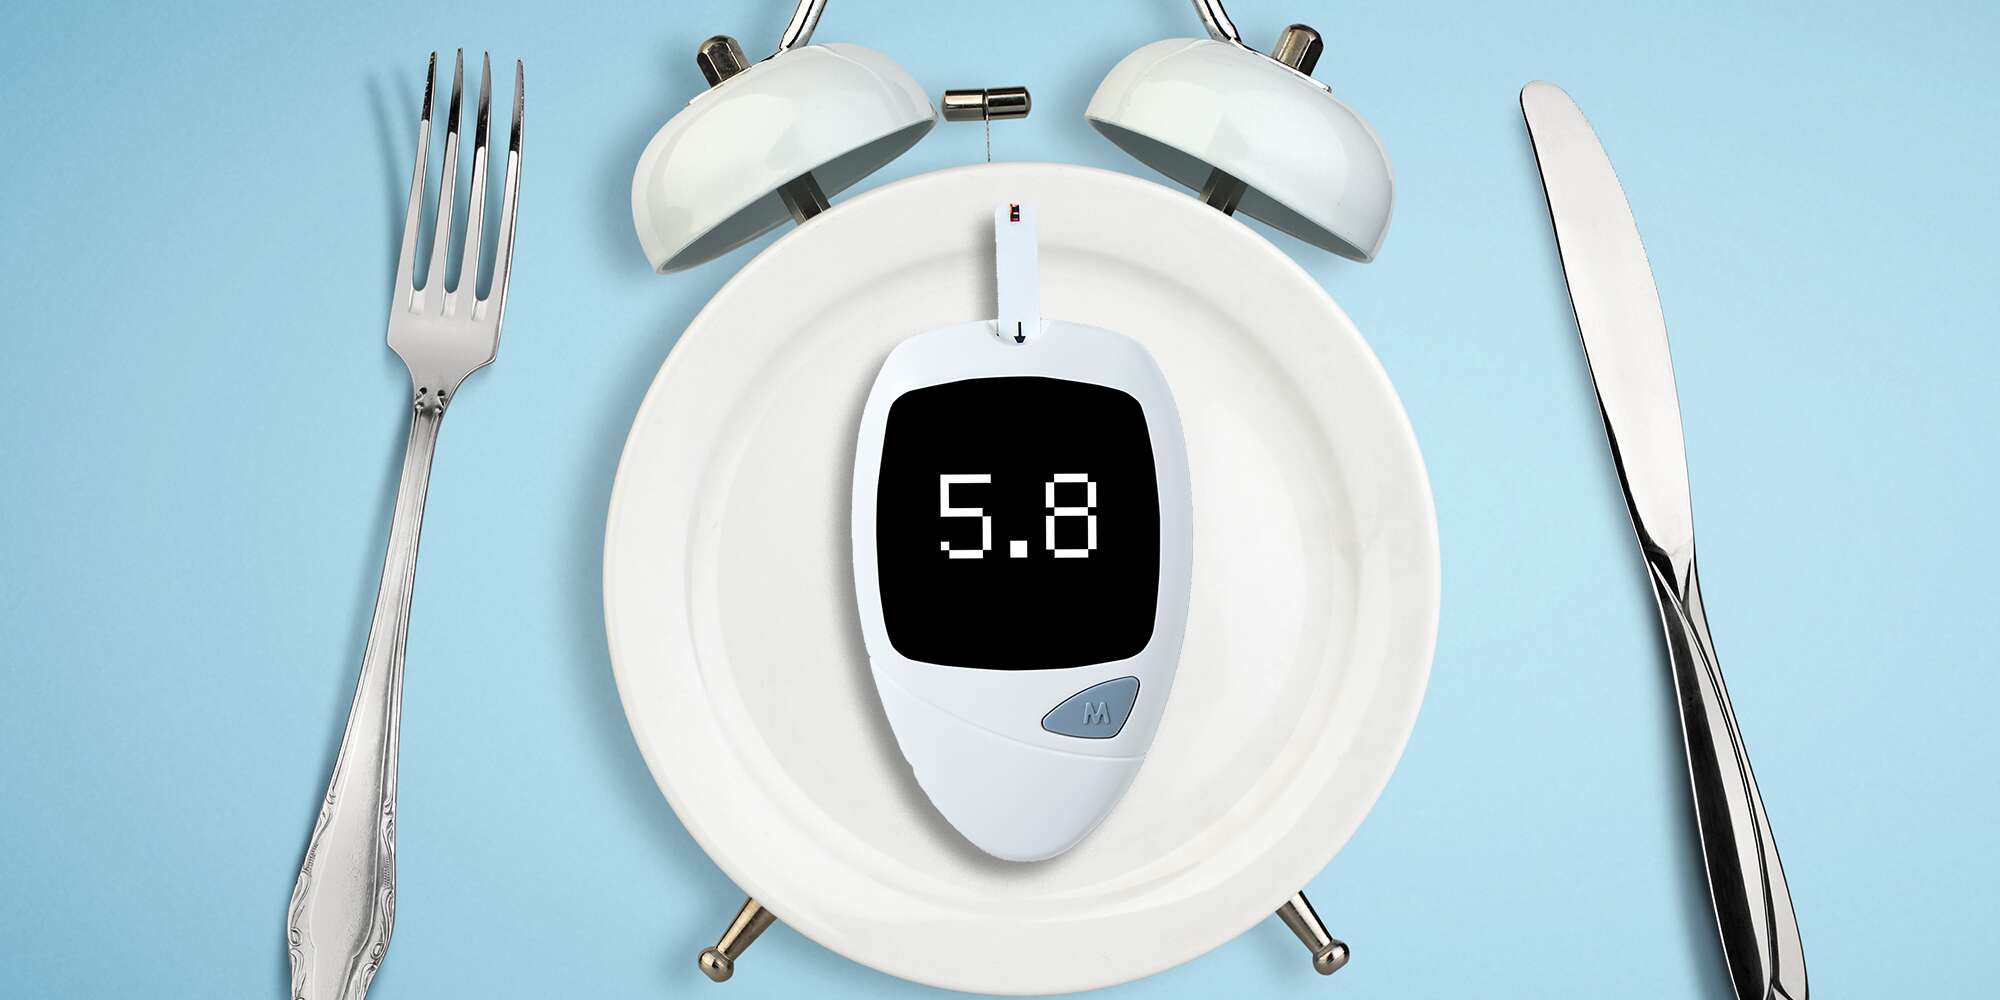 Why Are My Fasting Glucose Levels High?